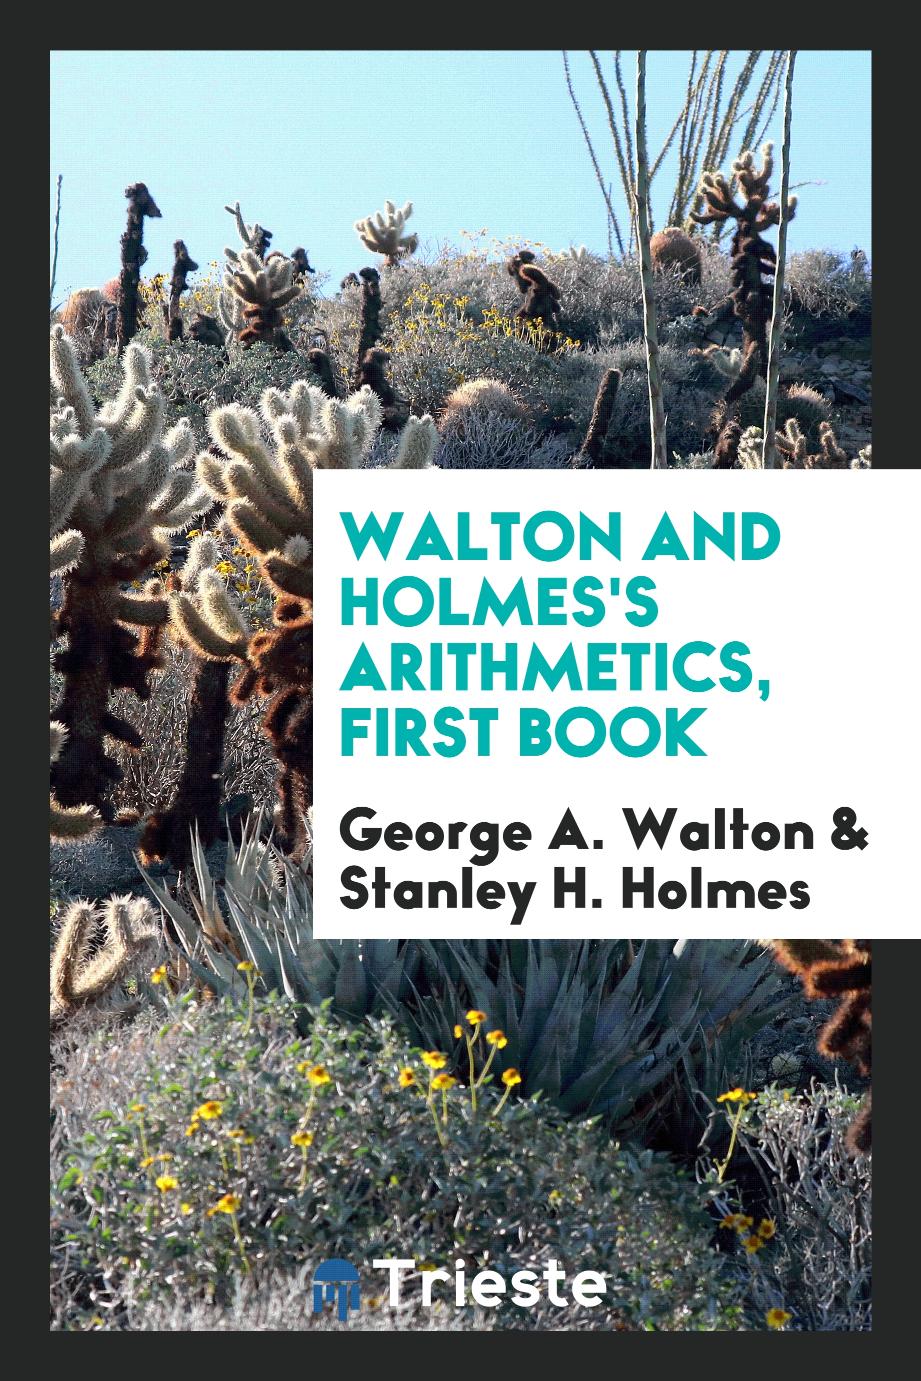 Walton and Holmes's Arithmetics, First Book